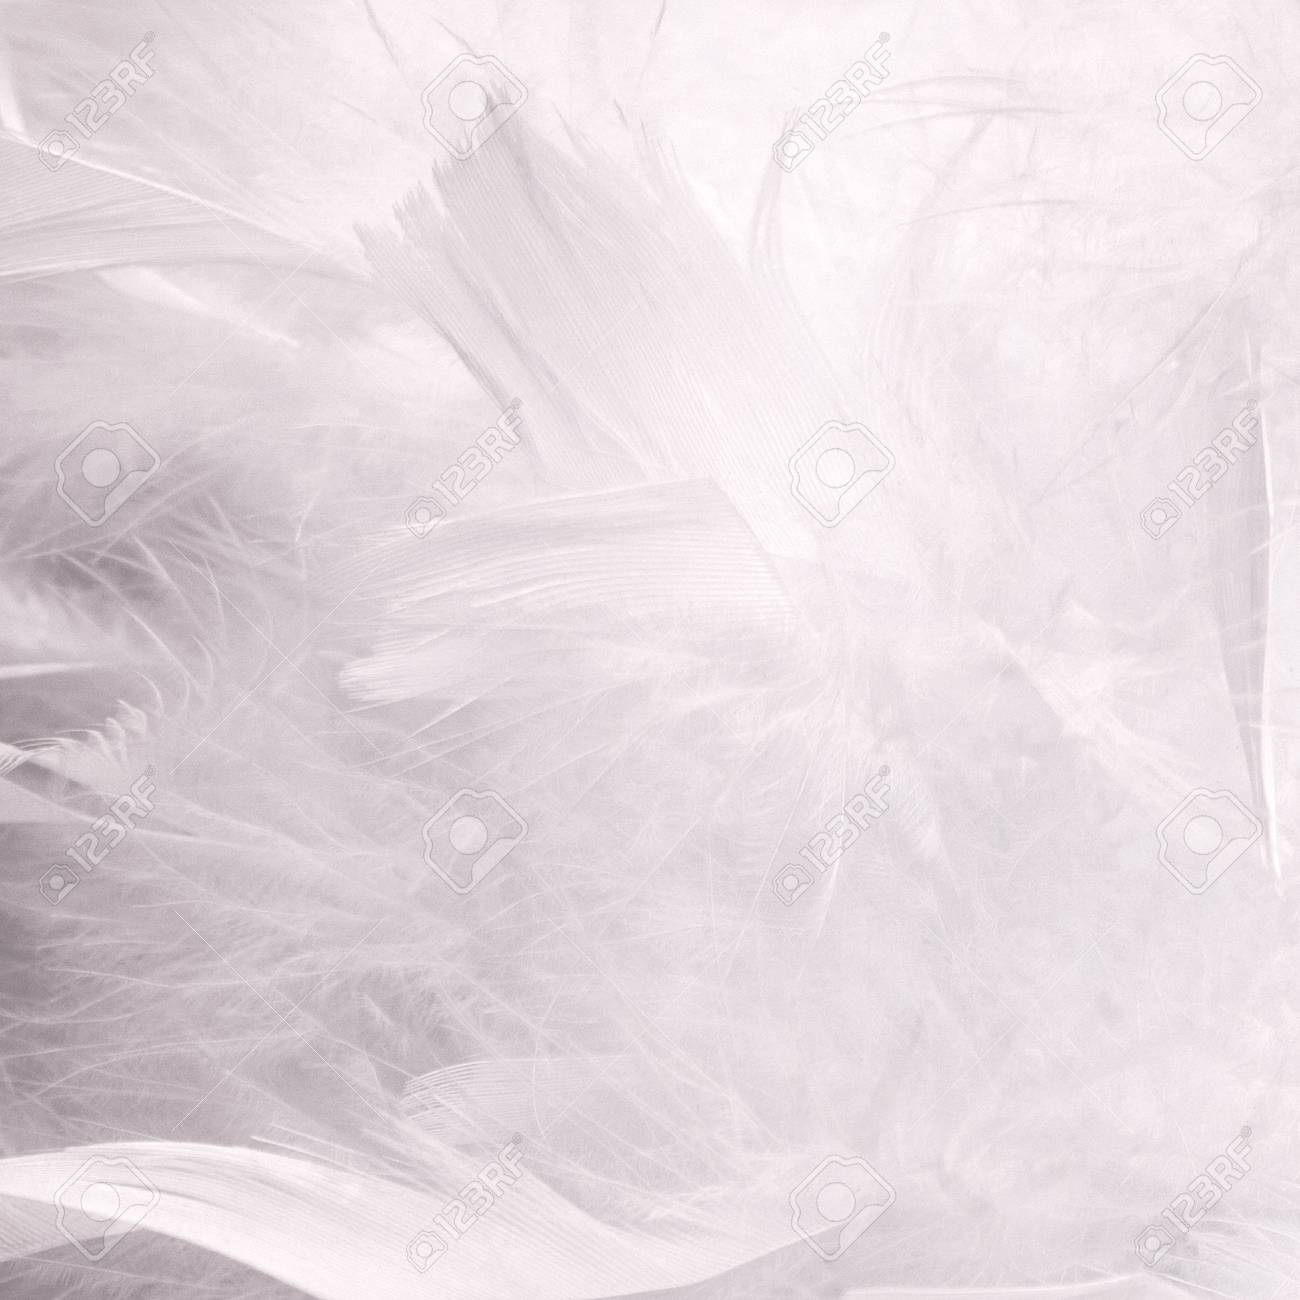 Abstract Beautiful White Tone Feathers Background Fluffy Feather